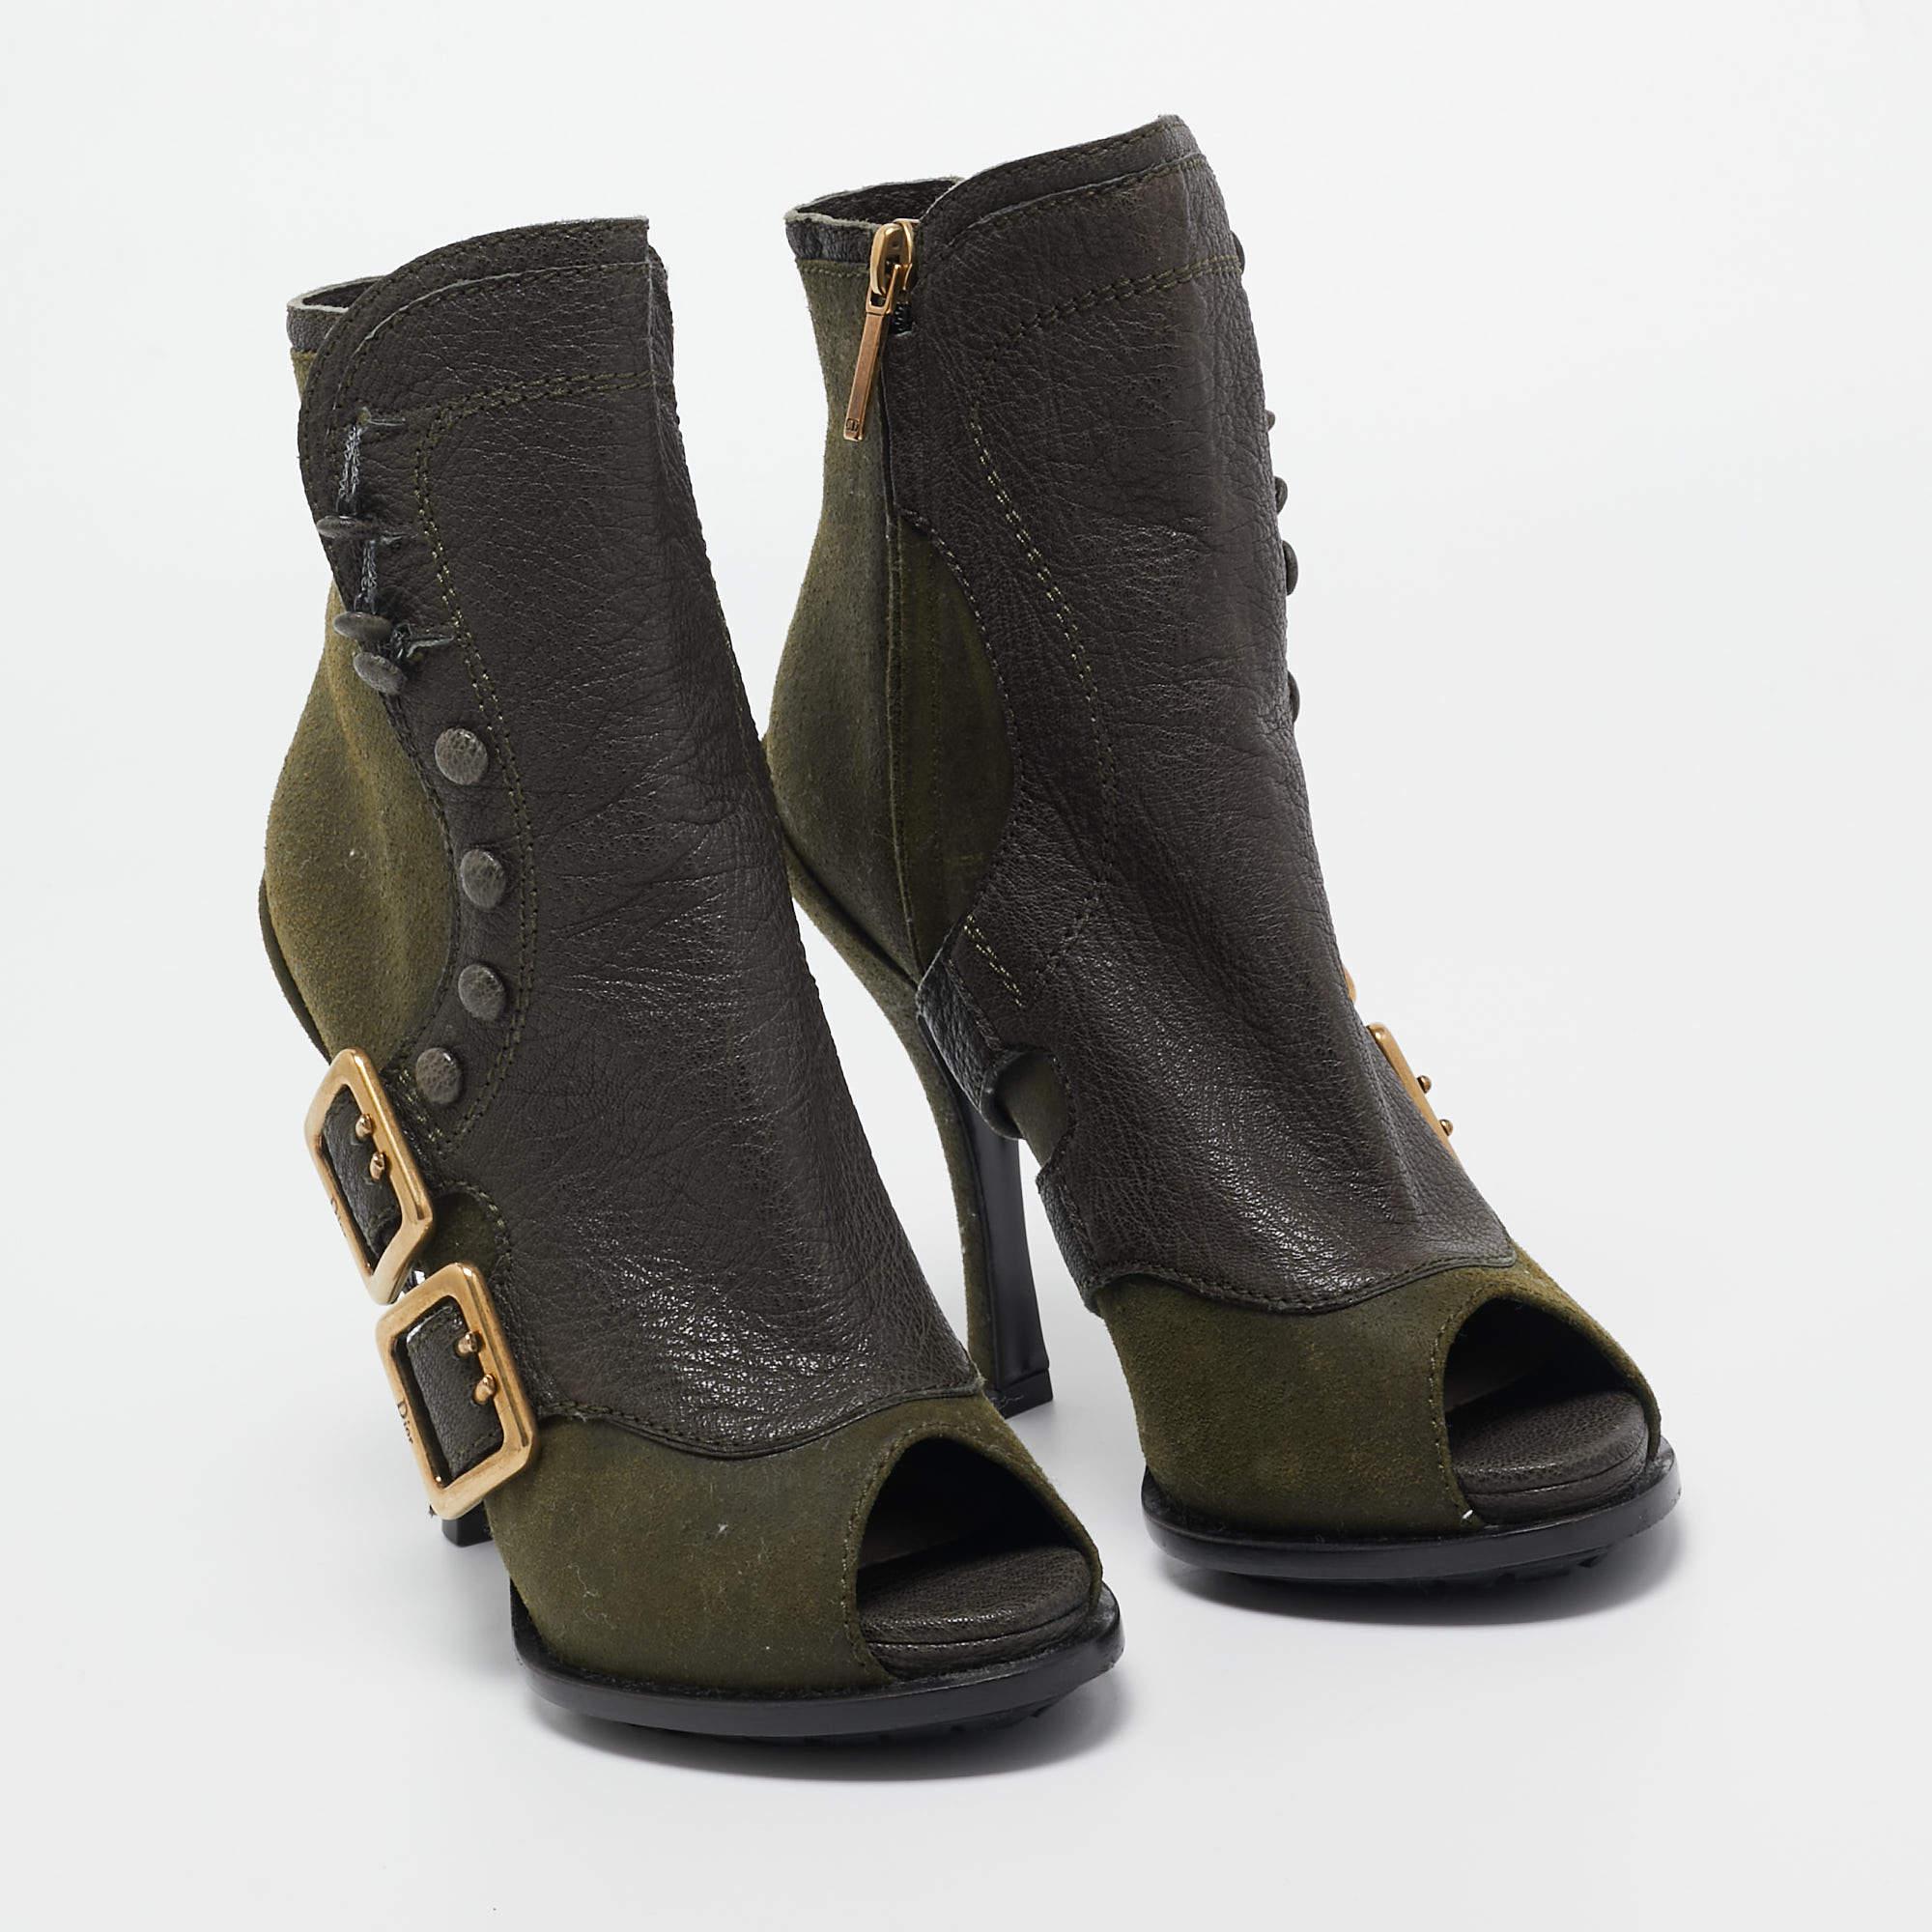 Dior Green Suede and Leather Peep Toe Ankle Boots Size 35.5 In New Condition For Sale In Dubai, Al Qouz 2